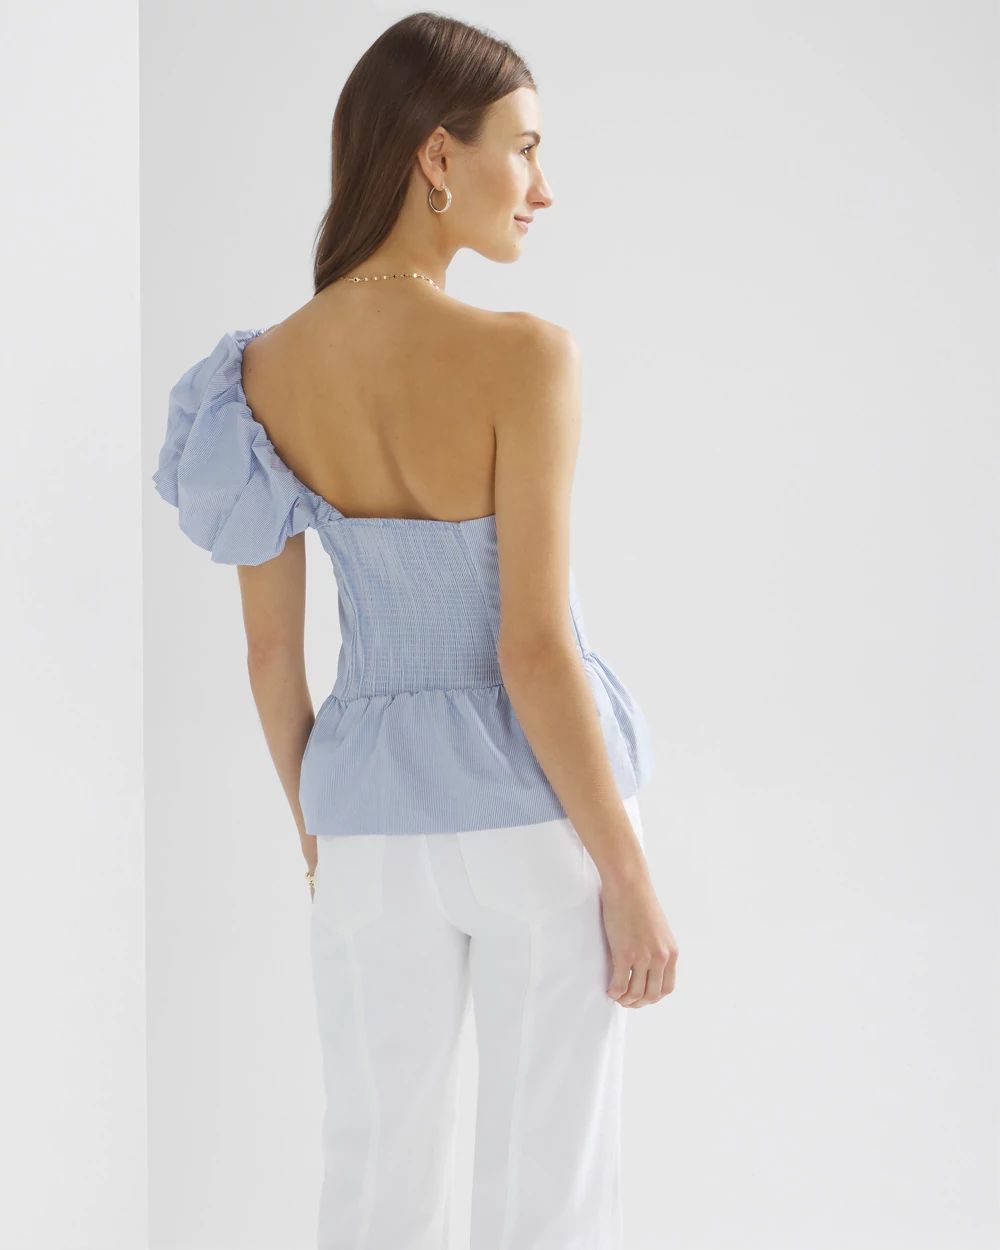 Petite Off-the-Shoulder Asymmetrical Poplin Bustier click to view larger image.